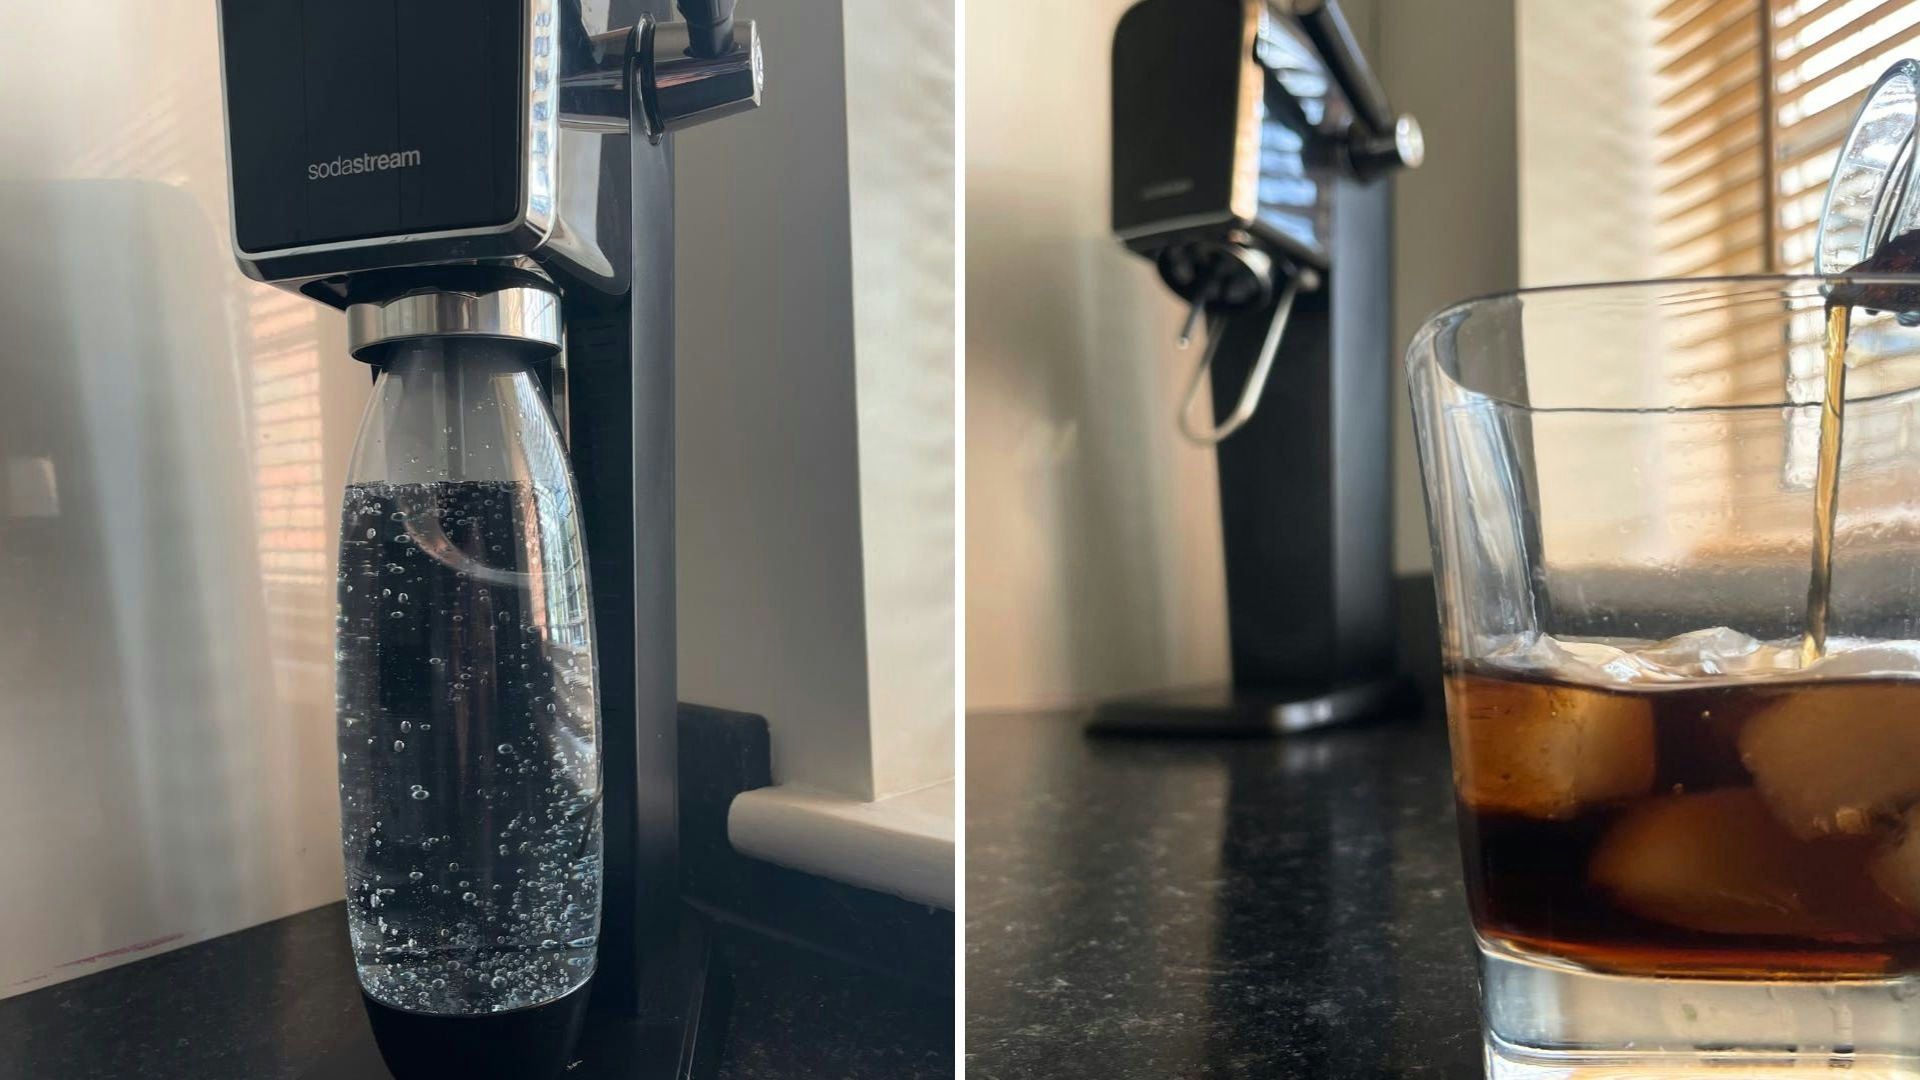 Products We Love from SodaStream » Gadget Flow